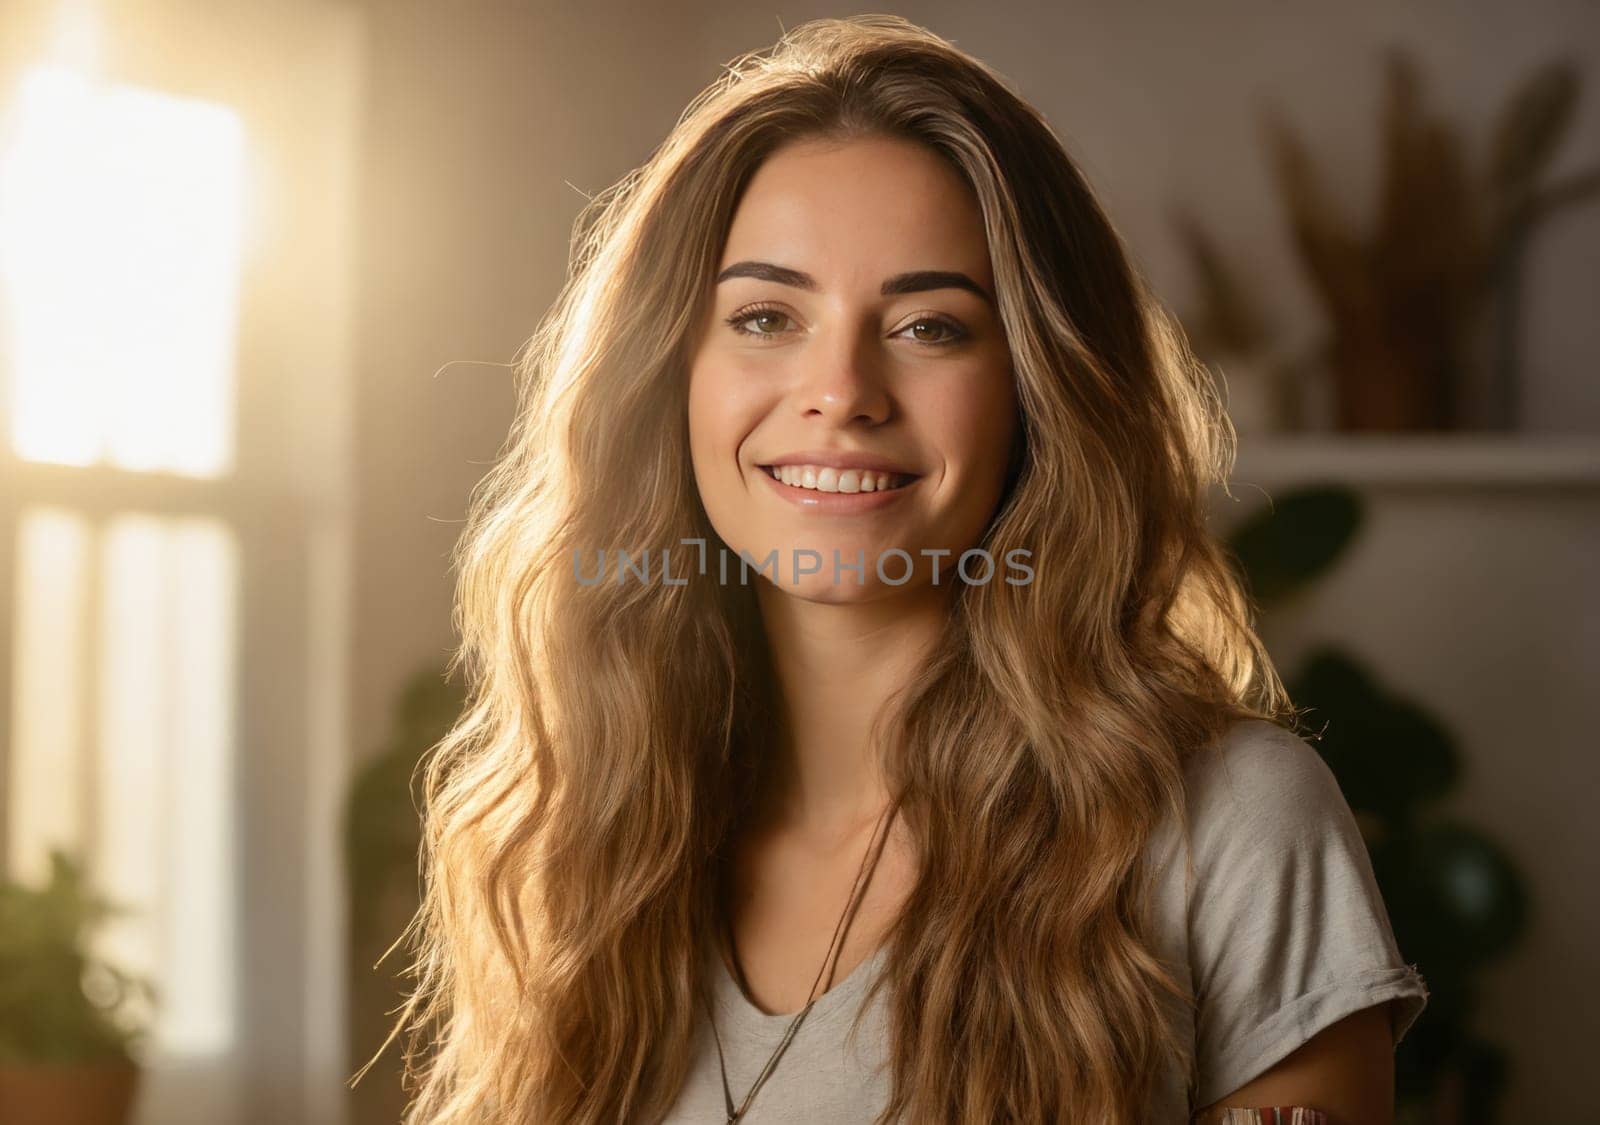 Young millennial woman with layered long hair is smiling for camera, showcasing her beautiful smile, lips, and eyebrows. Beautiful longhaired millennial woman smiles in room interior background